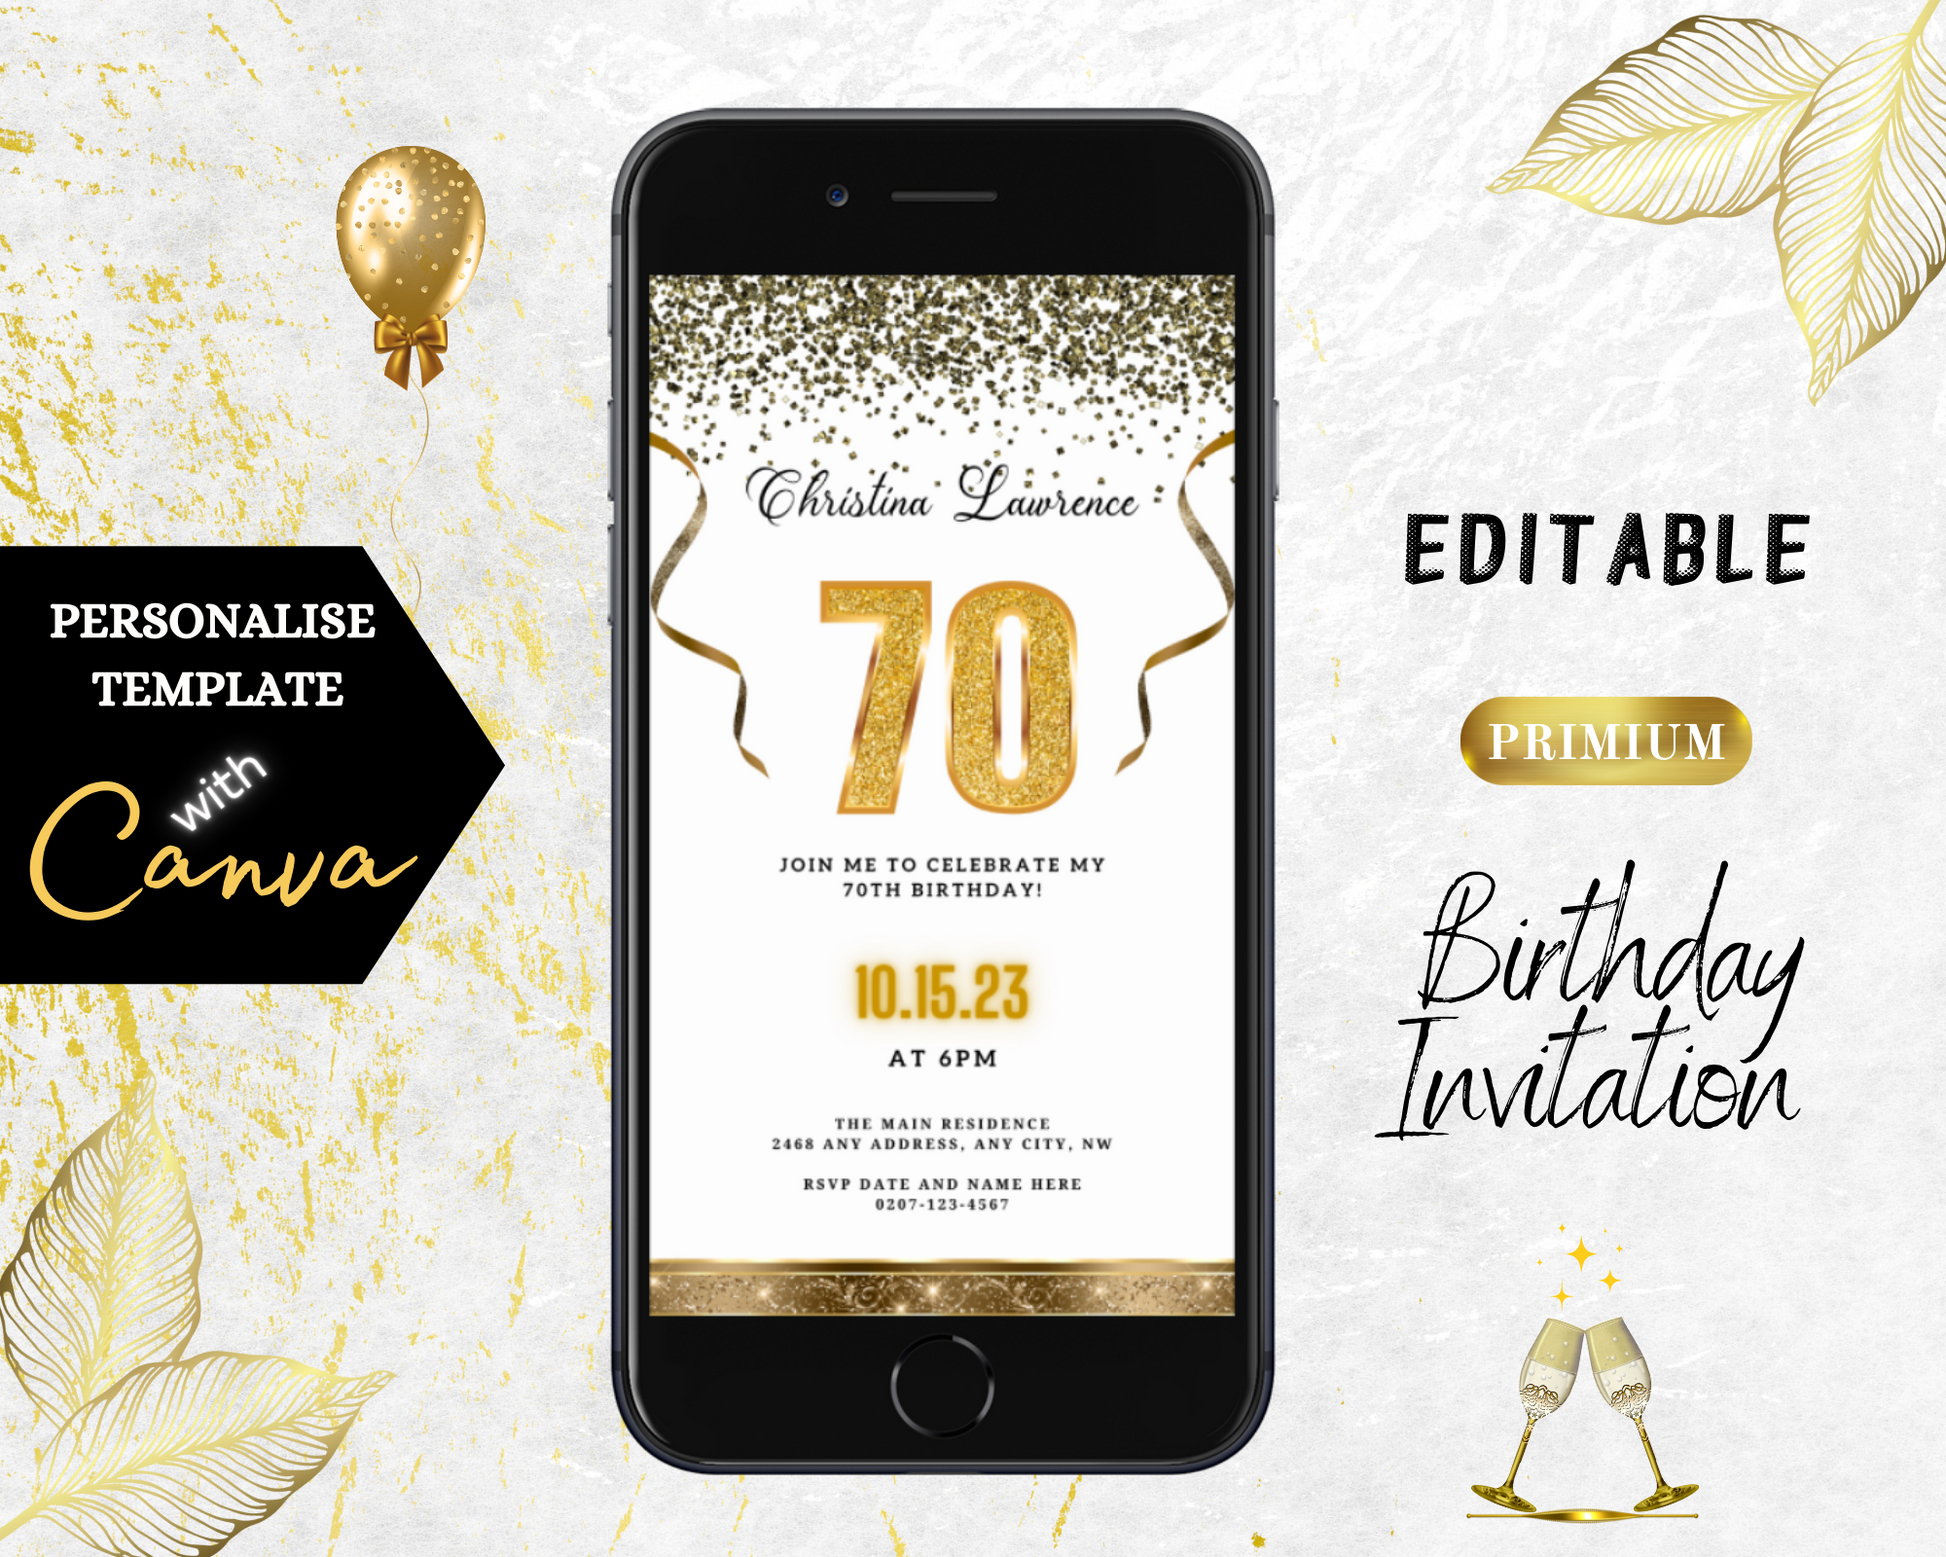 Customizable Digital White Gold Confetti 70th Birthday Evite displayed on a smartphone with gold elements and celebratory details, ready for personalization and digital sharing.